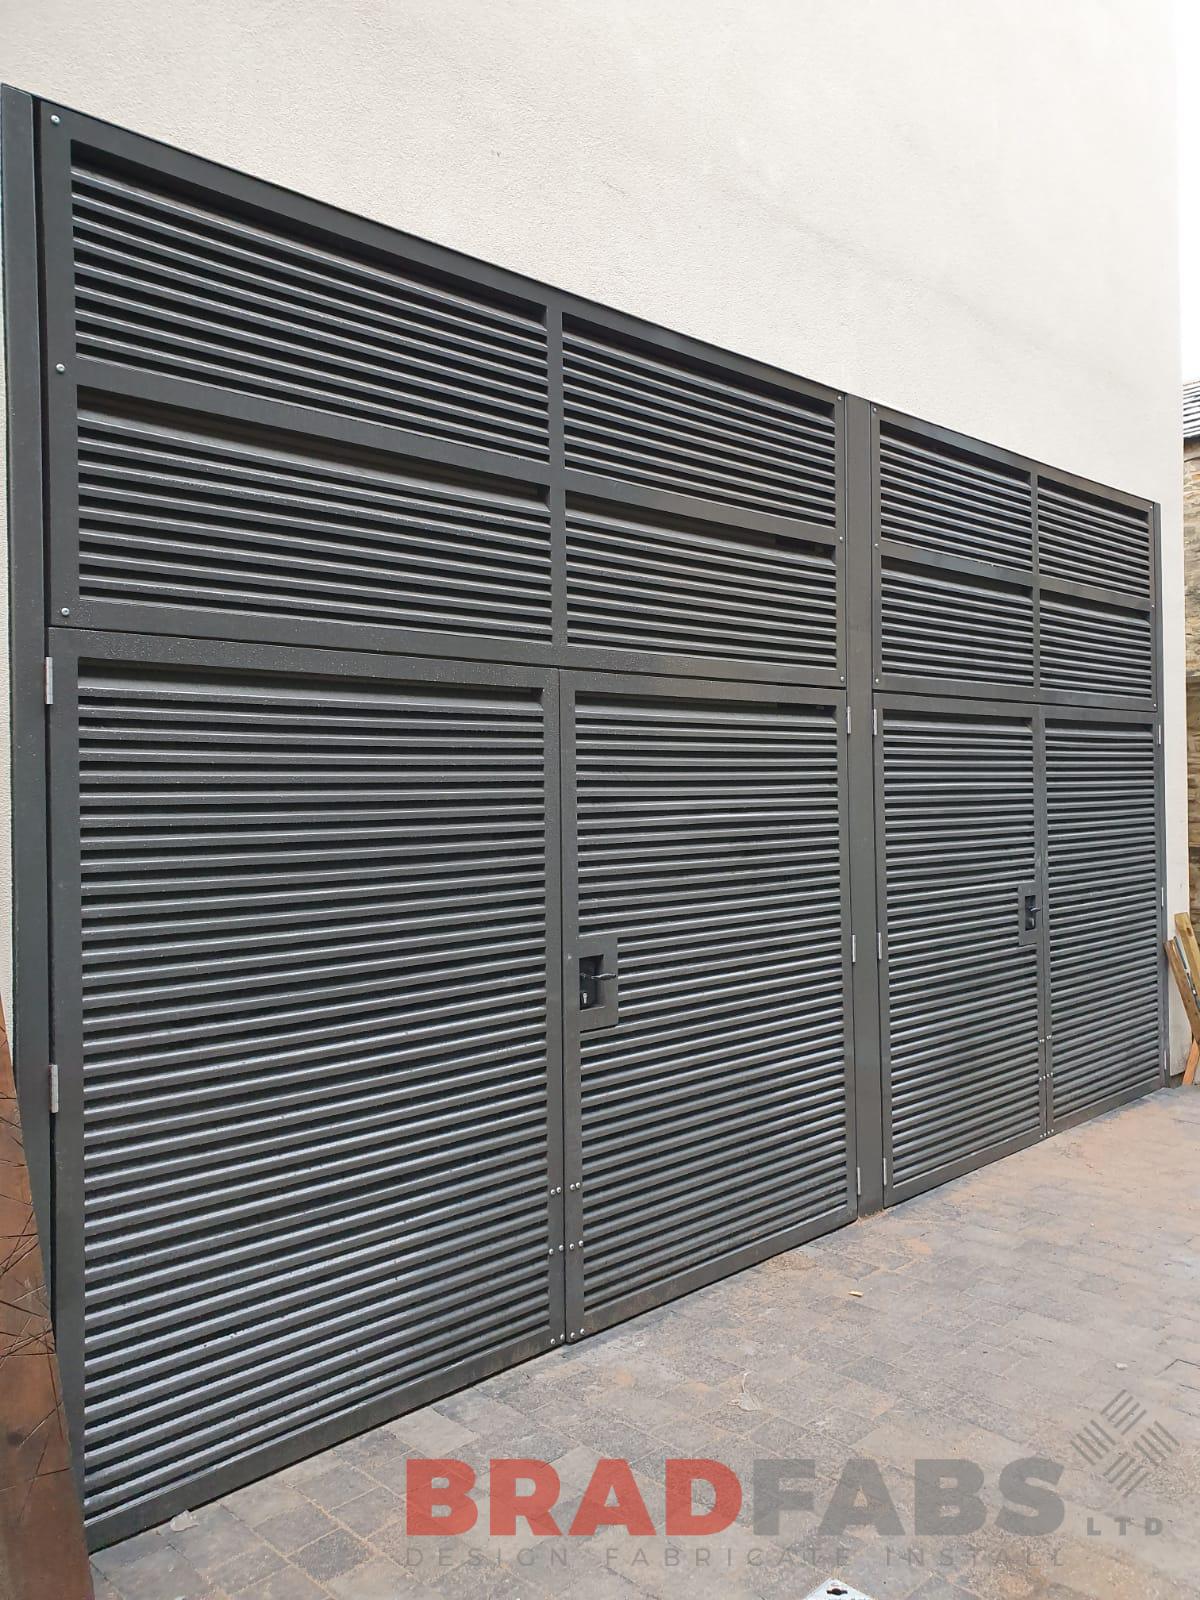 Commerical metal gates by Bradfabs